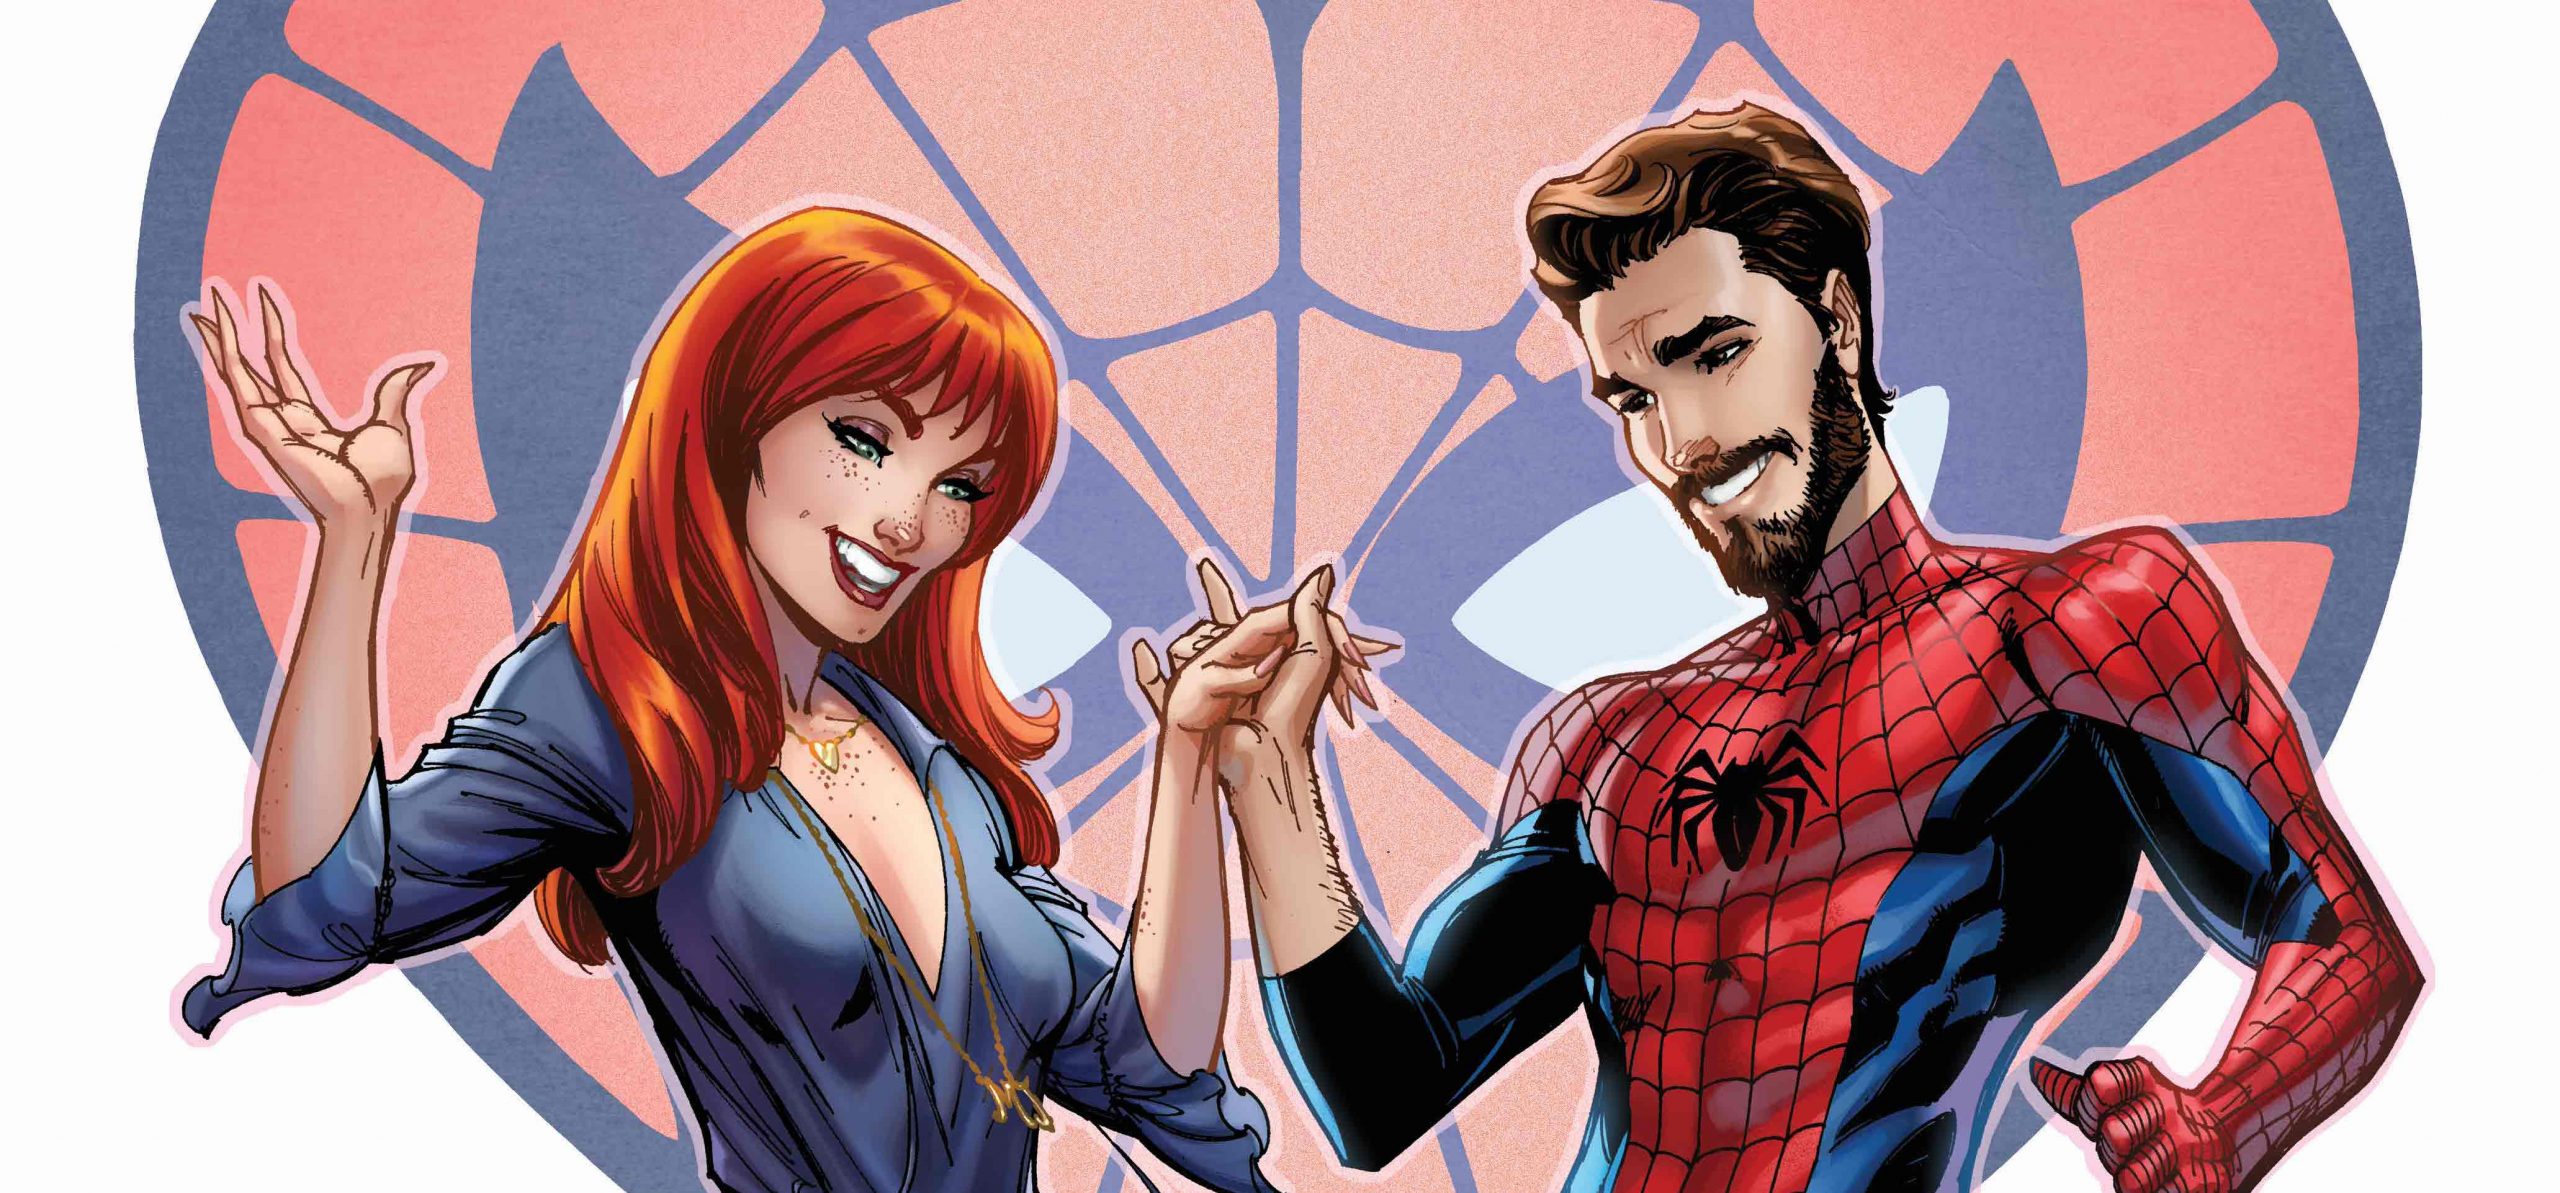 Celebrate MJ and Spider-Man together in new 'Ultimate Spider-Man' #1 cover